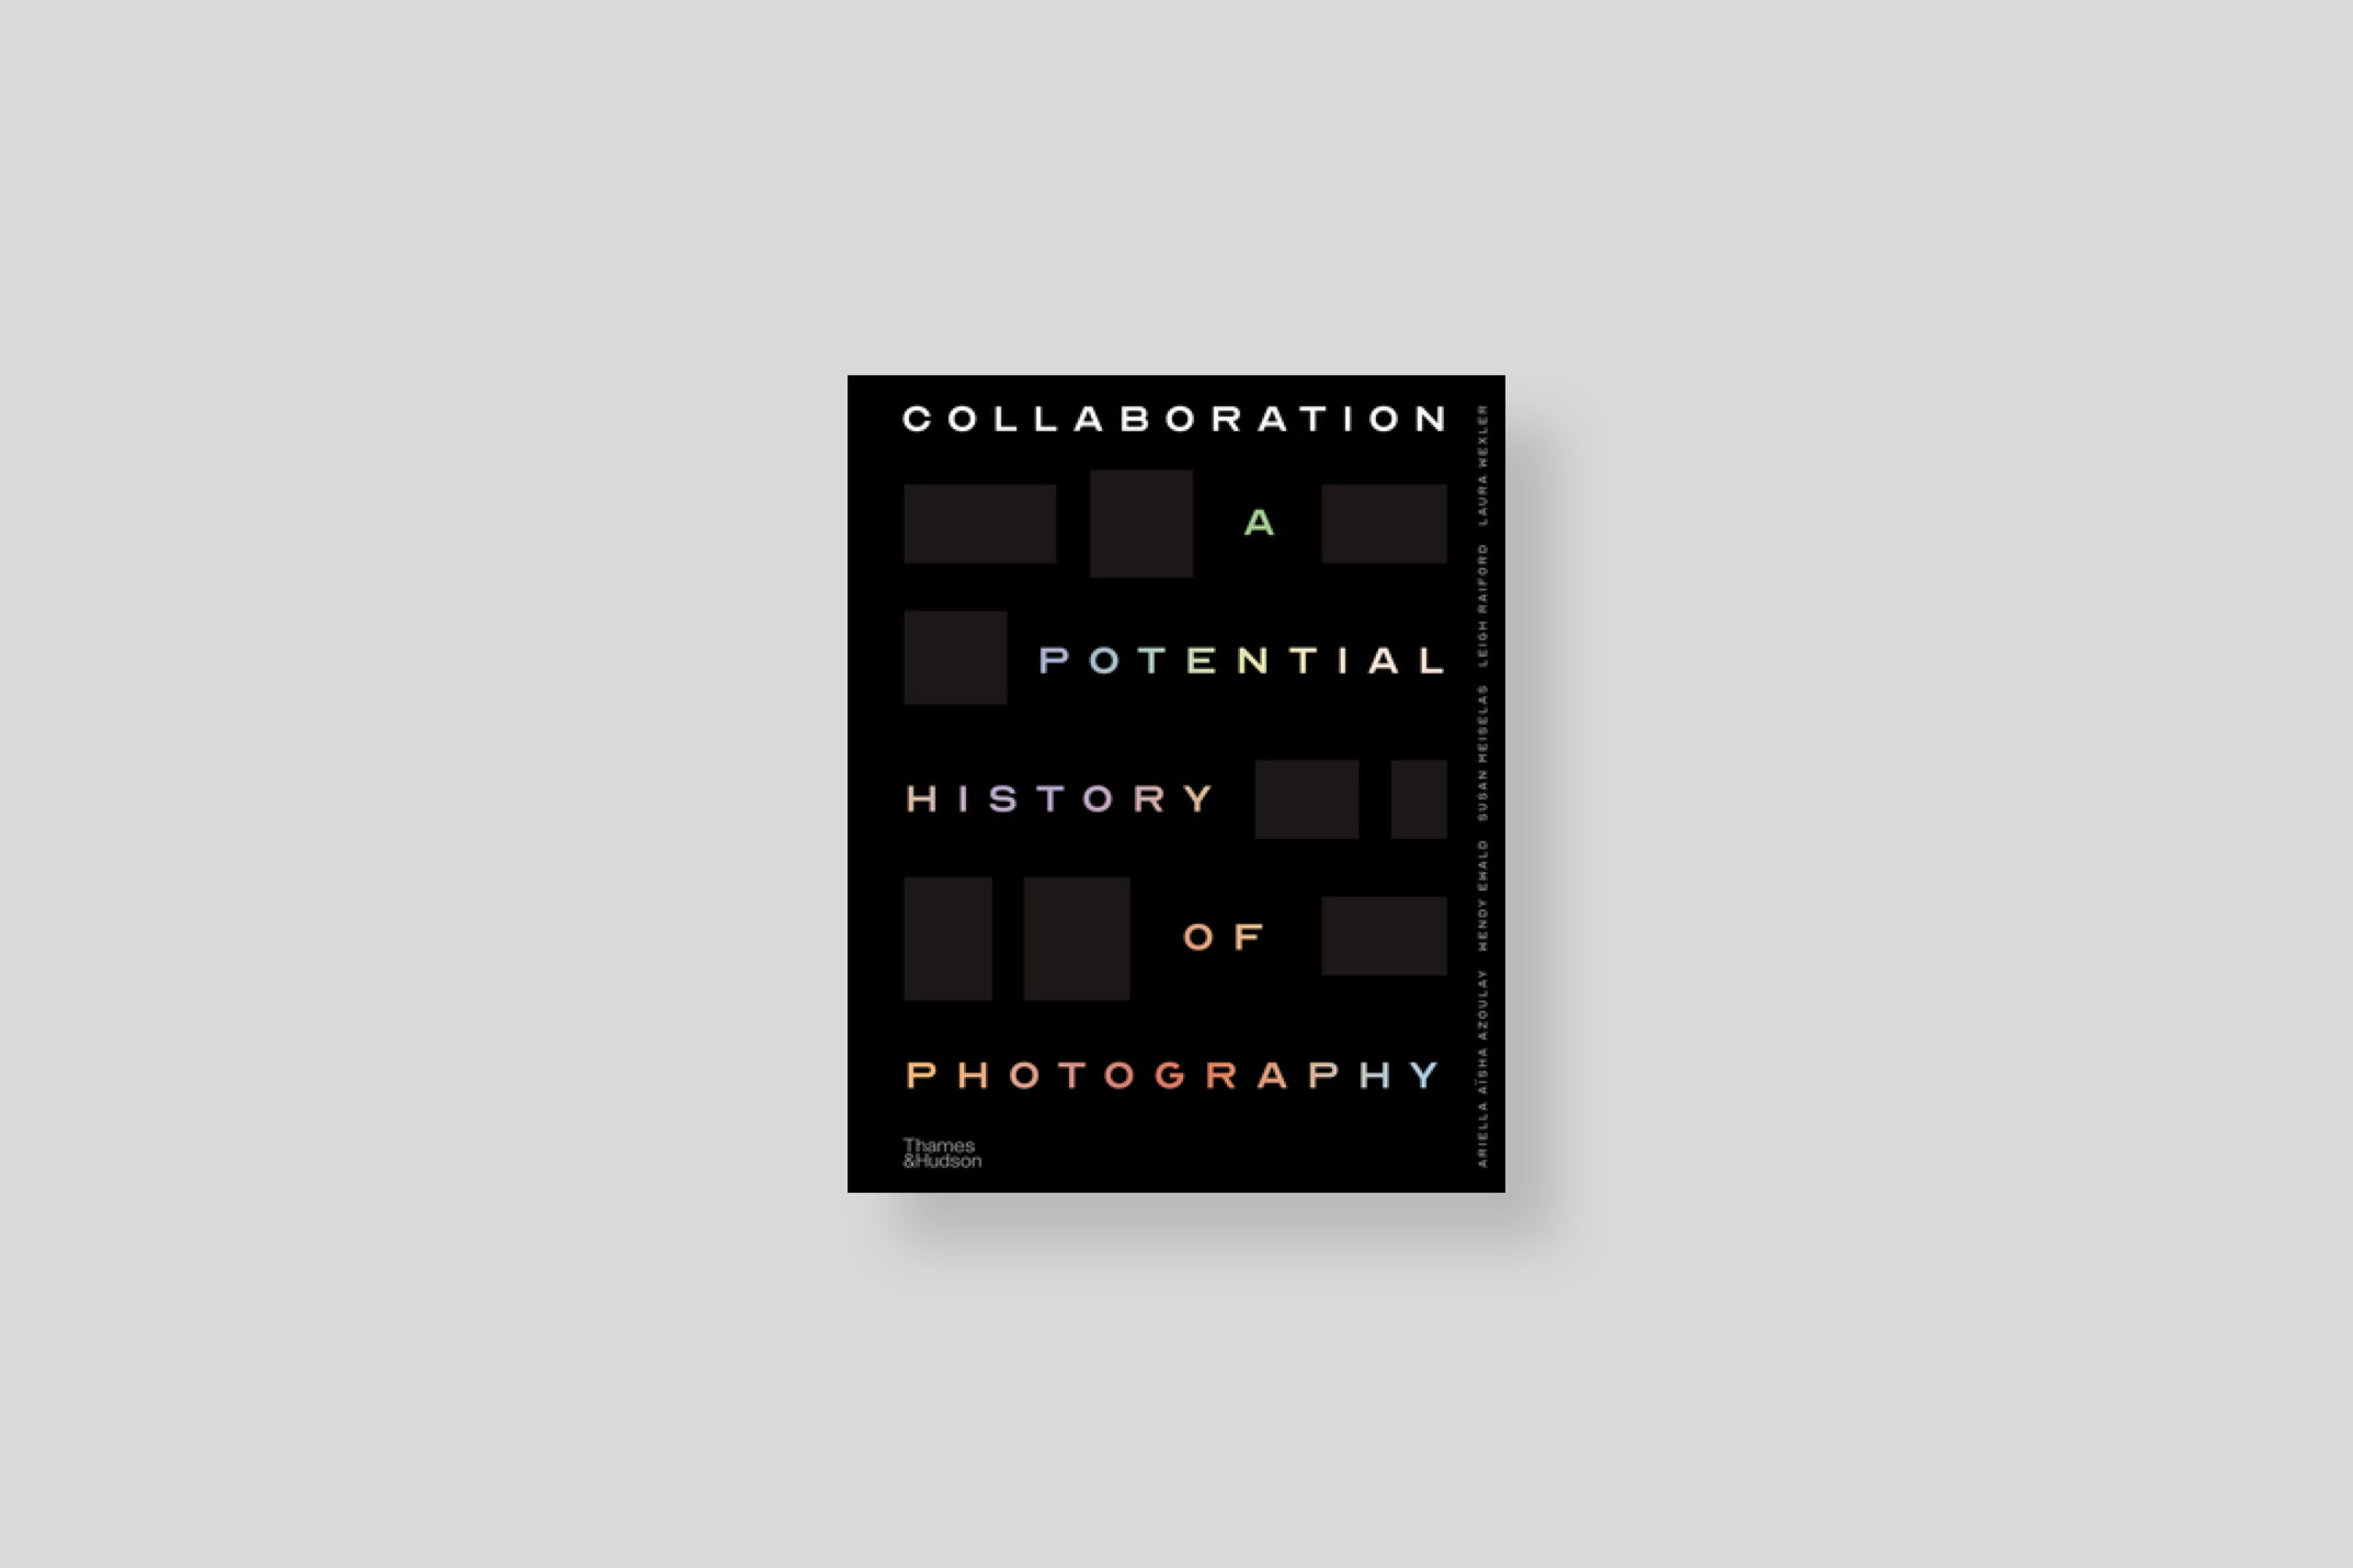 collaboration-a-potential-history-of-photography-azoulay-meiselas-raifors-wexler-ewald-thames-hudson-cover